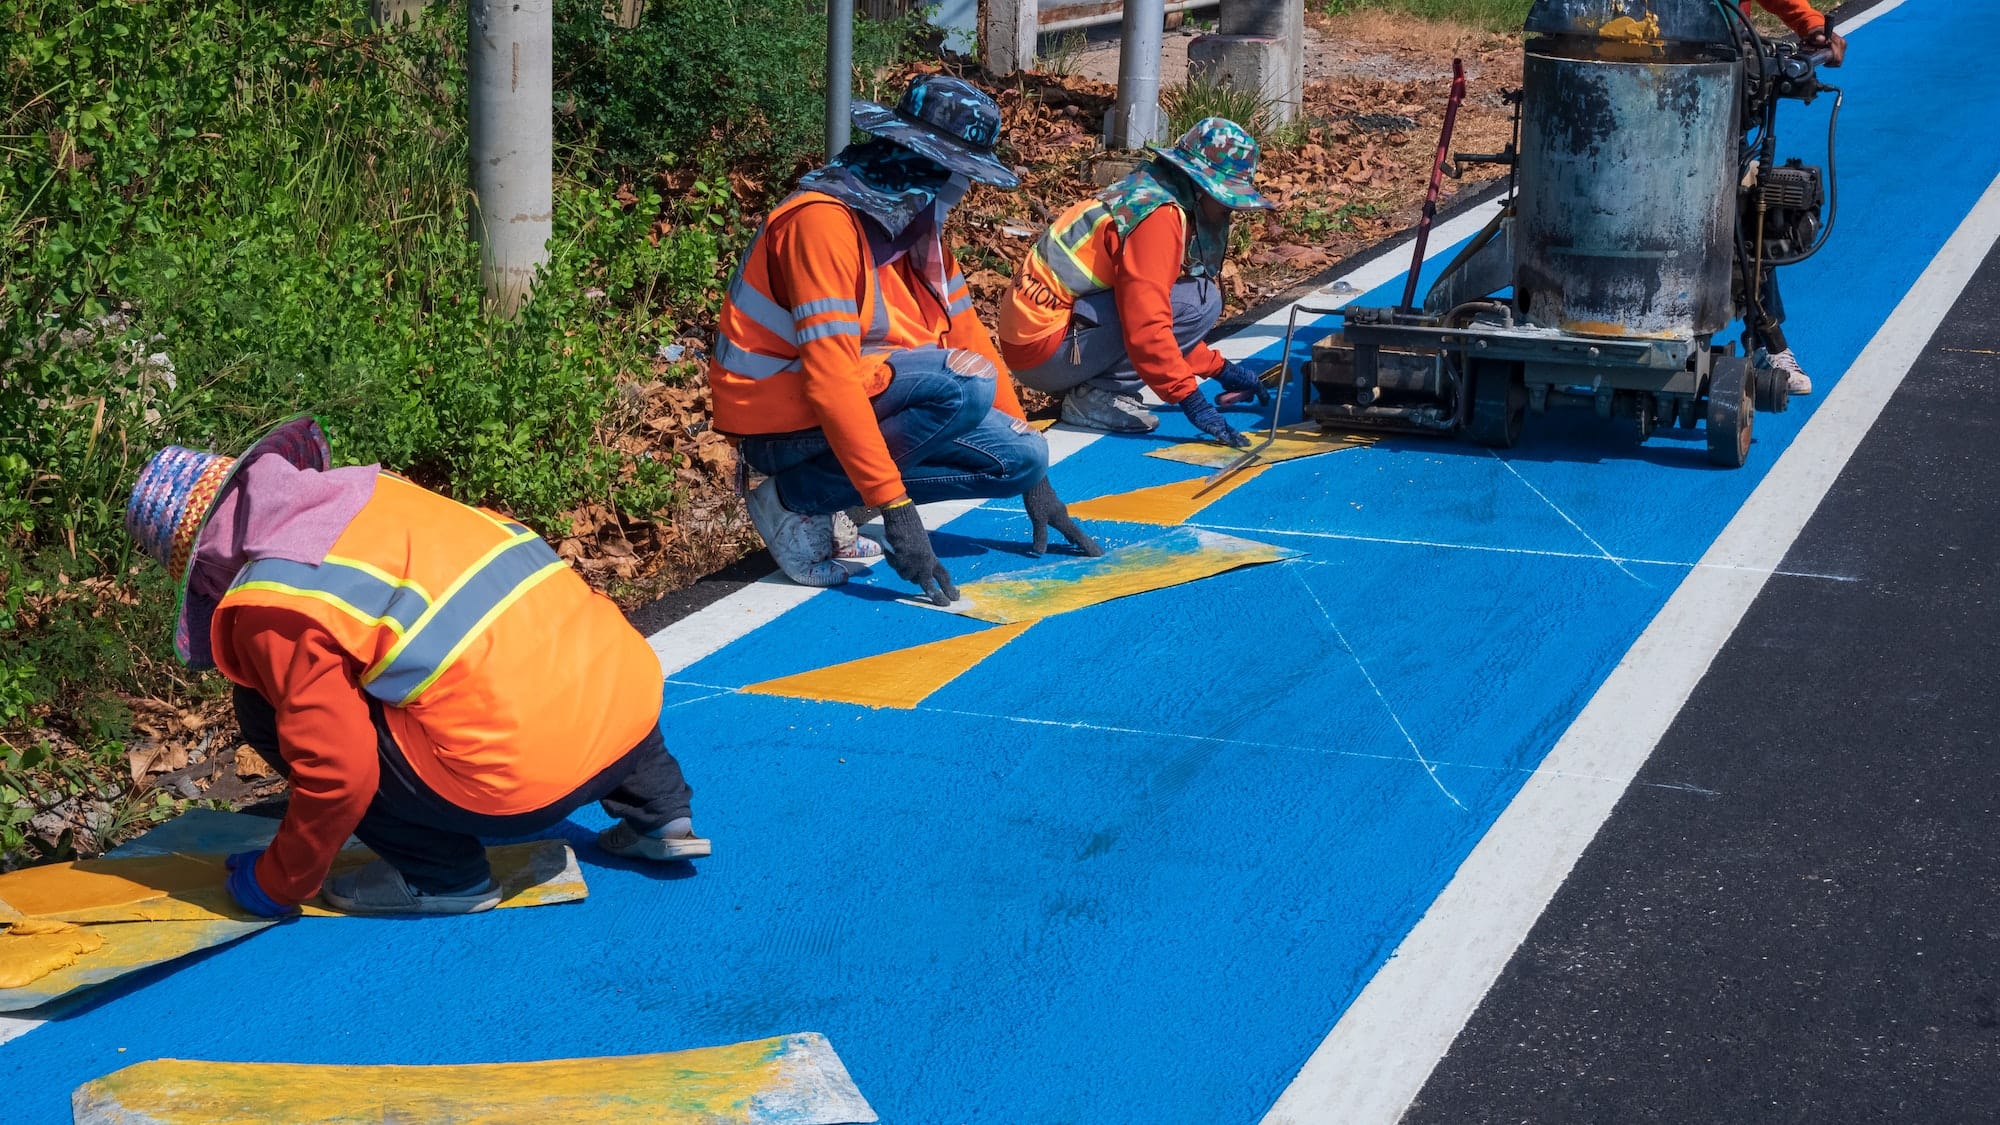 Road workers group painting traffic line and bicycle lane on asphalt road